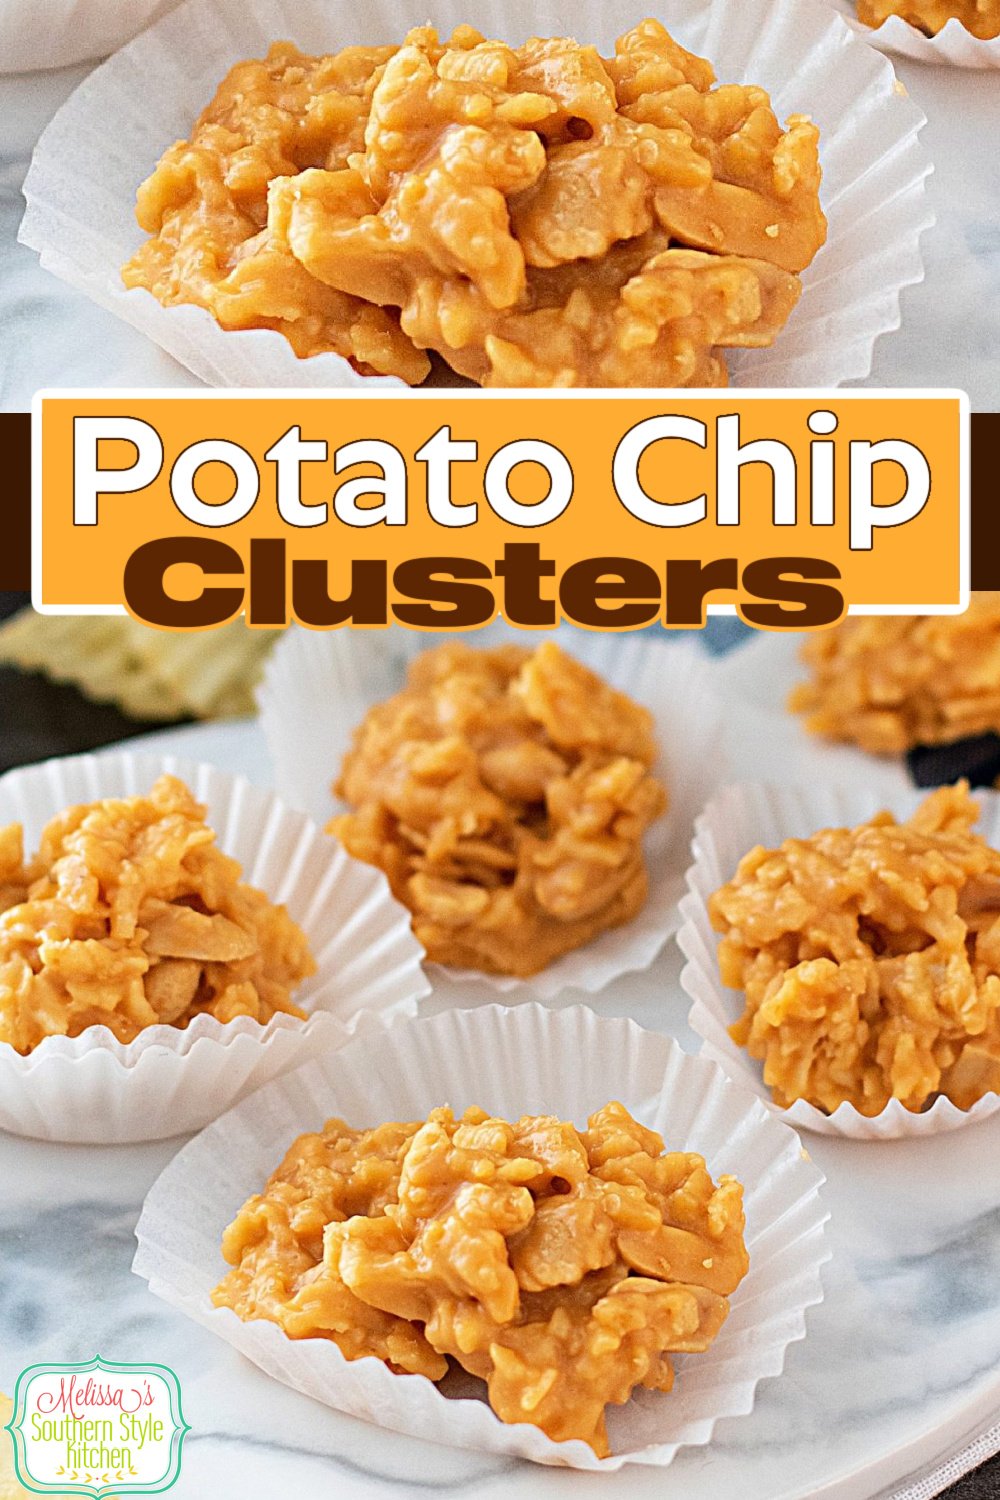 These Potato Chip Clusters feature that sweet and salty flavor combination that moves them to the top of the oh-so-yummy candies to make. #potatochipclusters #potatochipcandy #potatochips #candy #easycandyrecipes #butterscotch #sweets #desserts #dessertfoodrecipes #holidayrecipes #christmascandy via @melissasssk